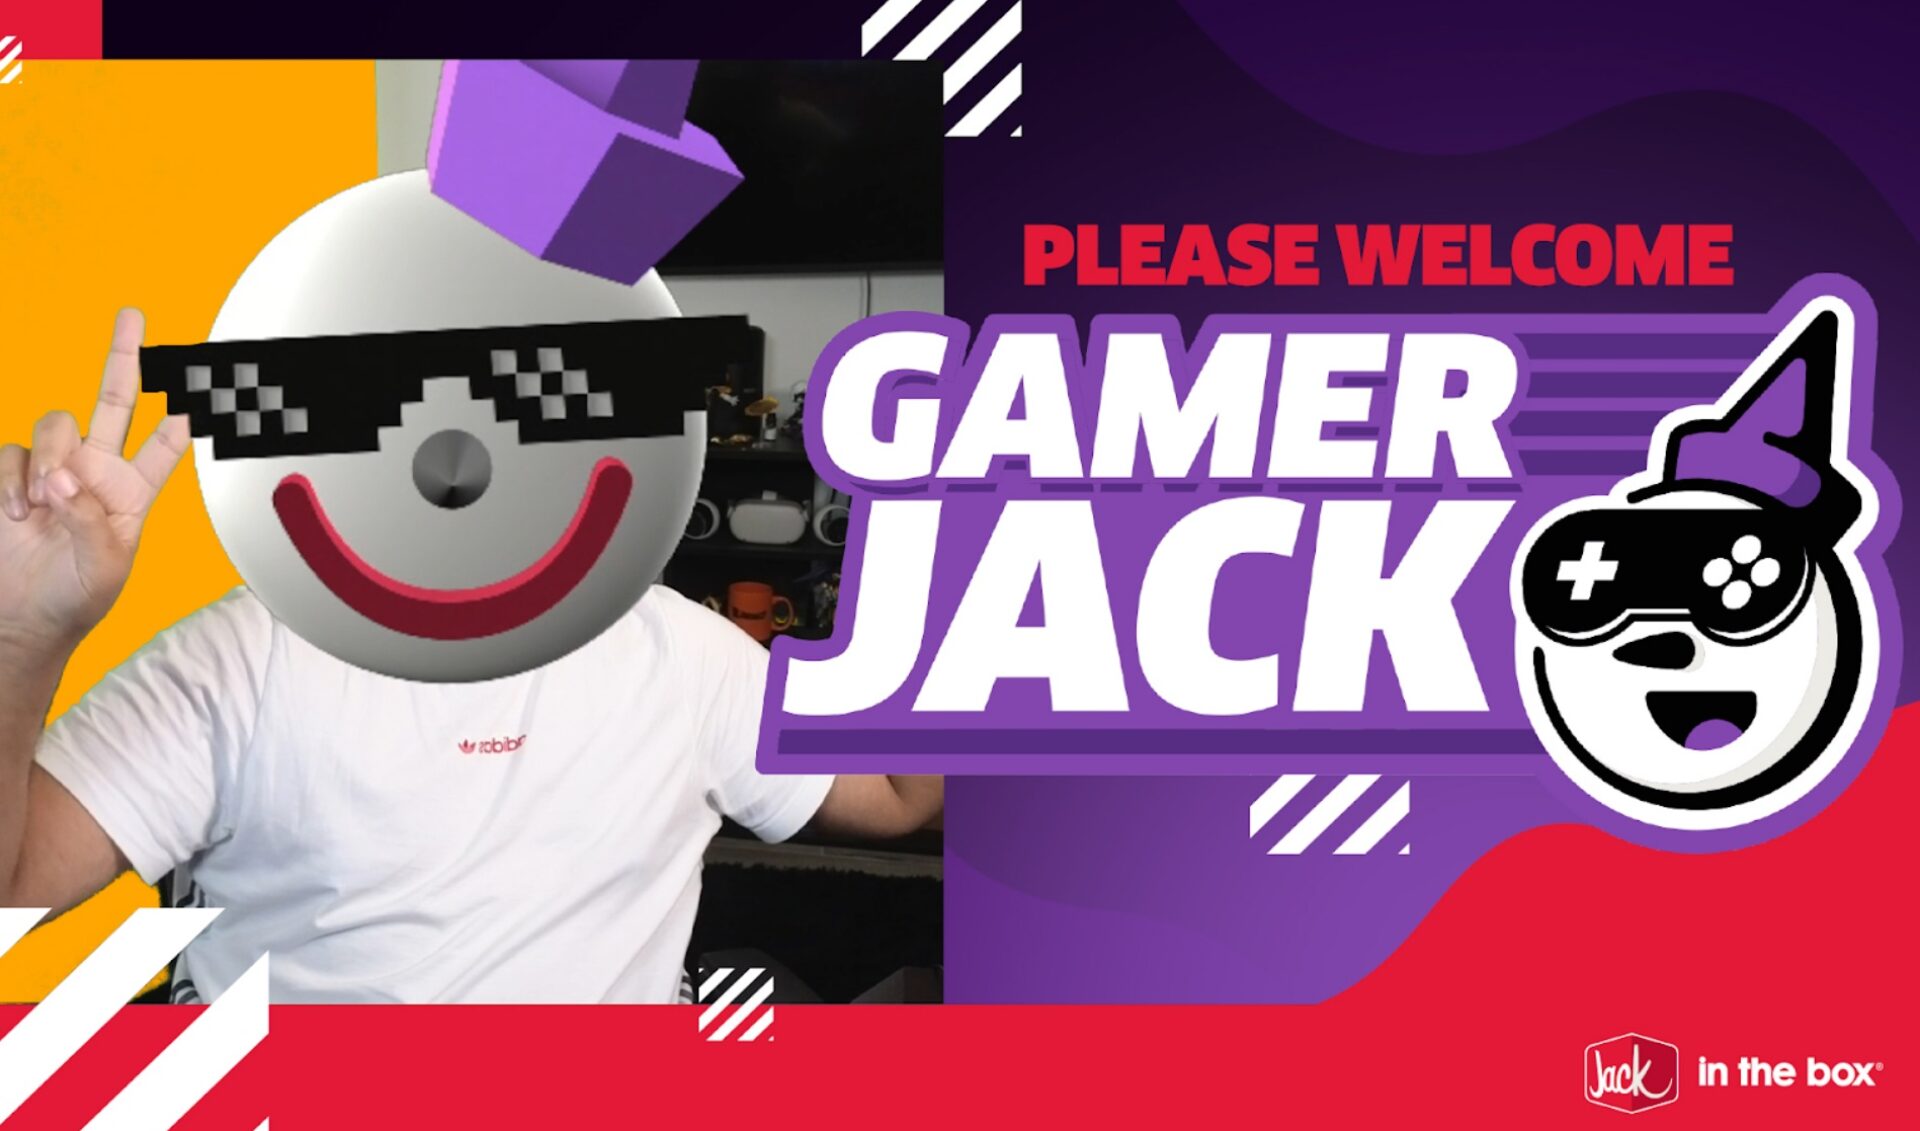 Jack in the Box has introduced its official streamer: Say hi to Gamer Jack.